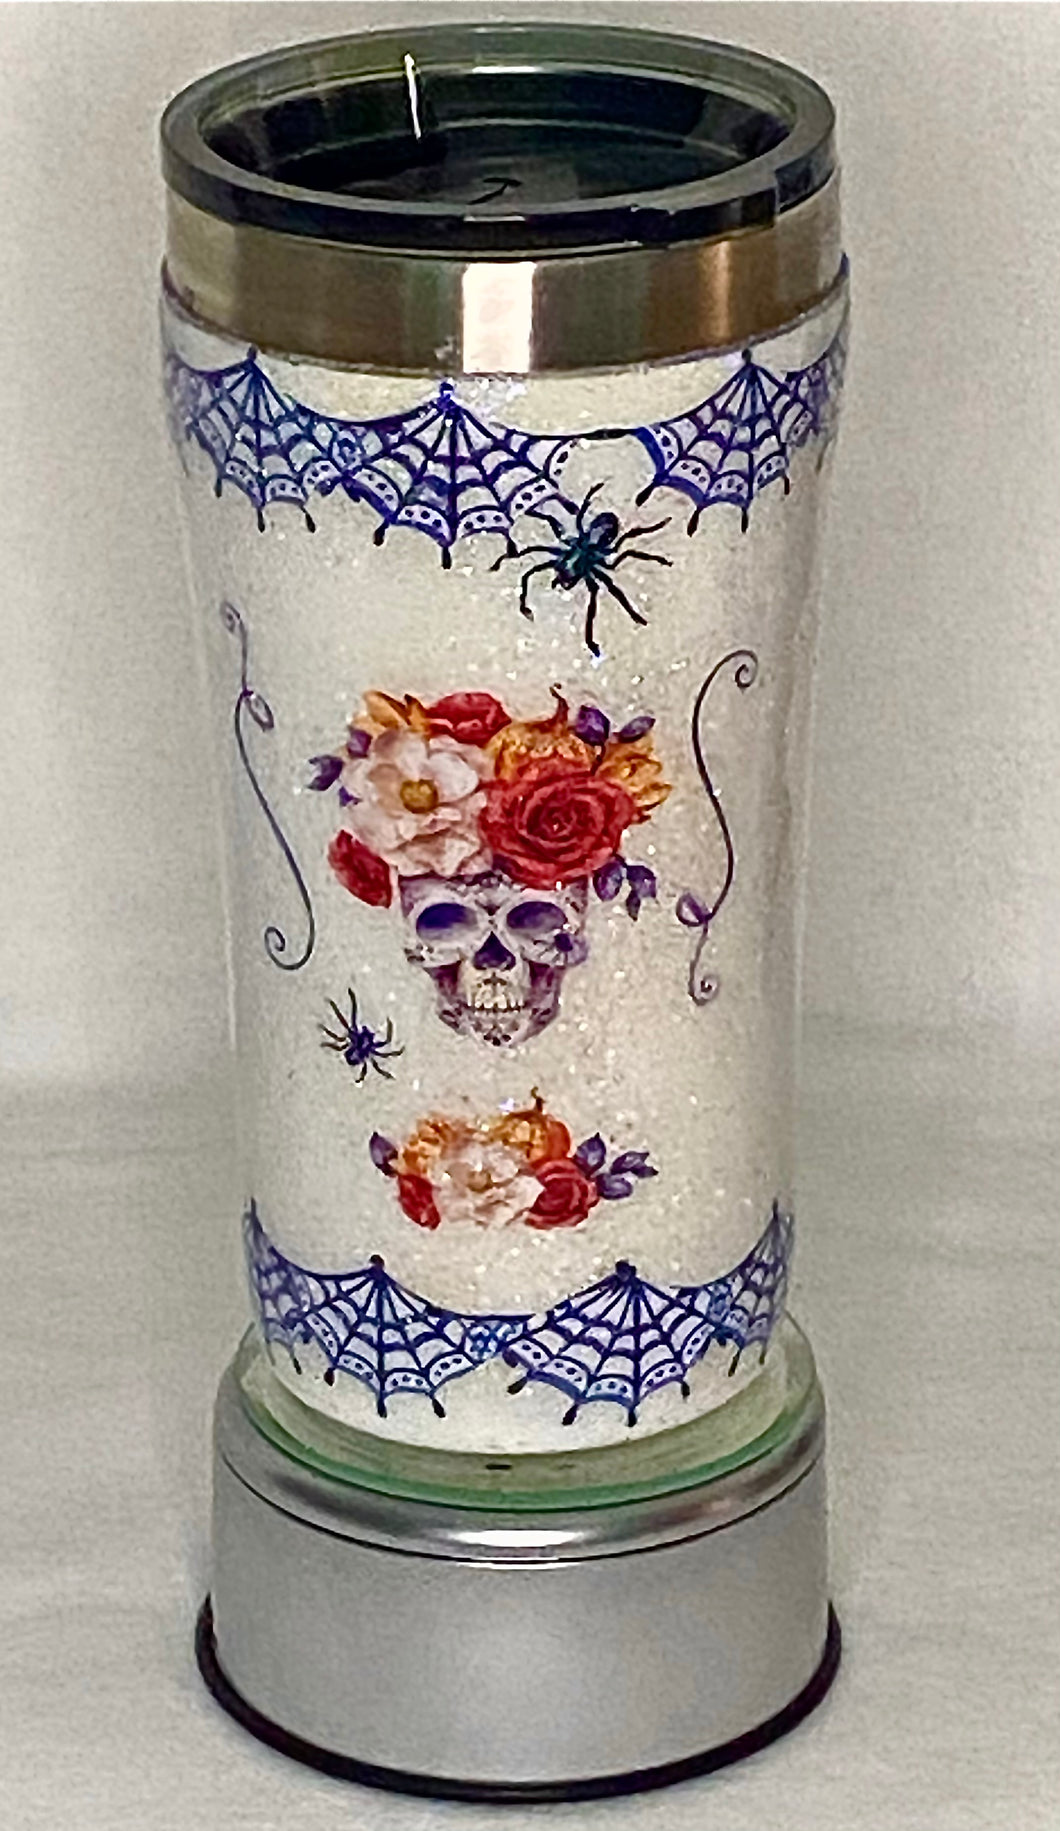 Skeleton Chic is a handmade 20-ounce tumbler that is hand-painted with glitter, waterslide, and epoxy. It's perfect for those who love creepy, crawlers skeleton heads and Halloween! It comes with a lid. We can personalize and design these tumblers any way you like. We can add monograms, names, sayings, etc. We can design by color, size, and your preference of personalization.